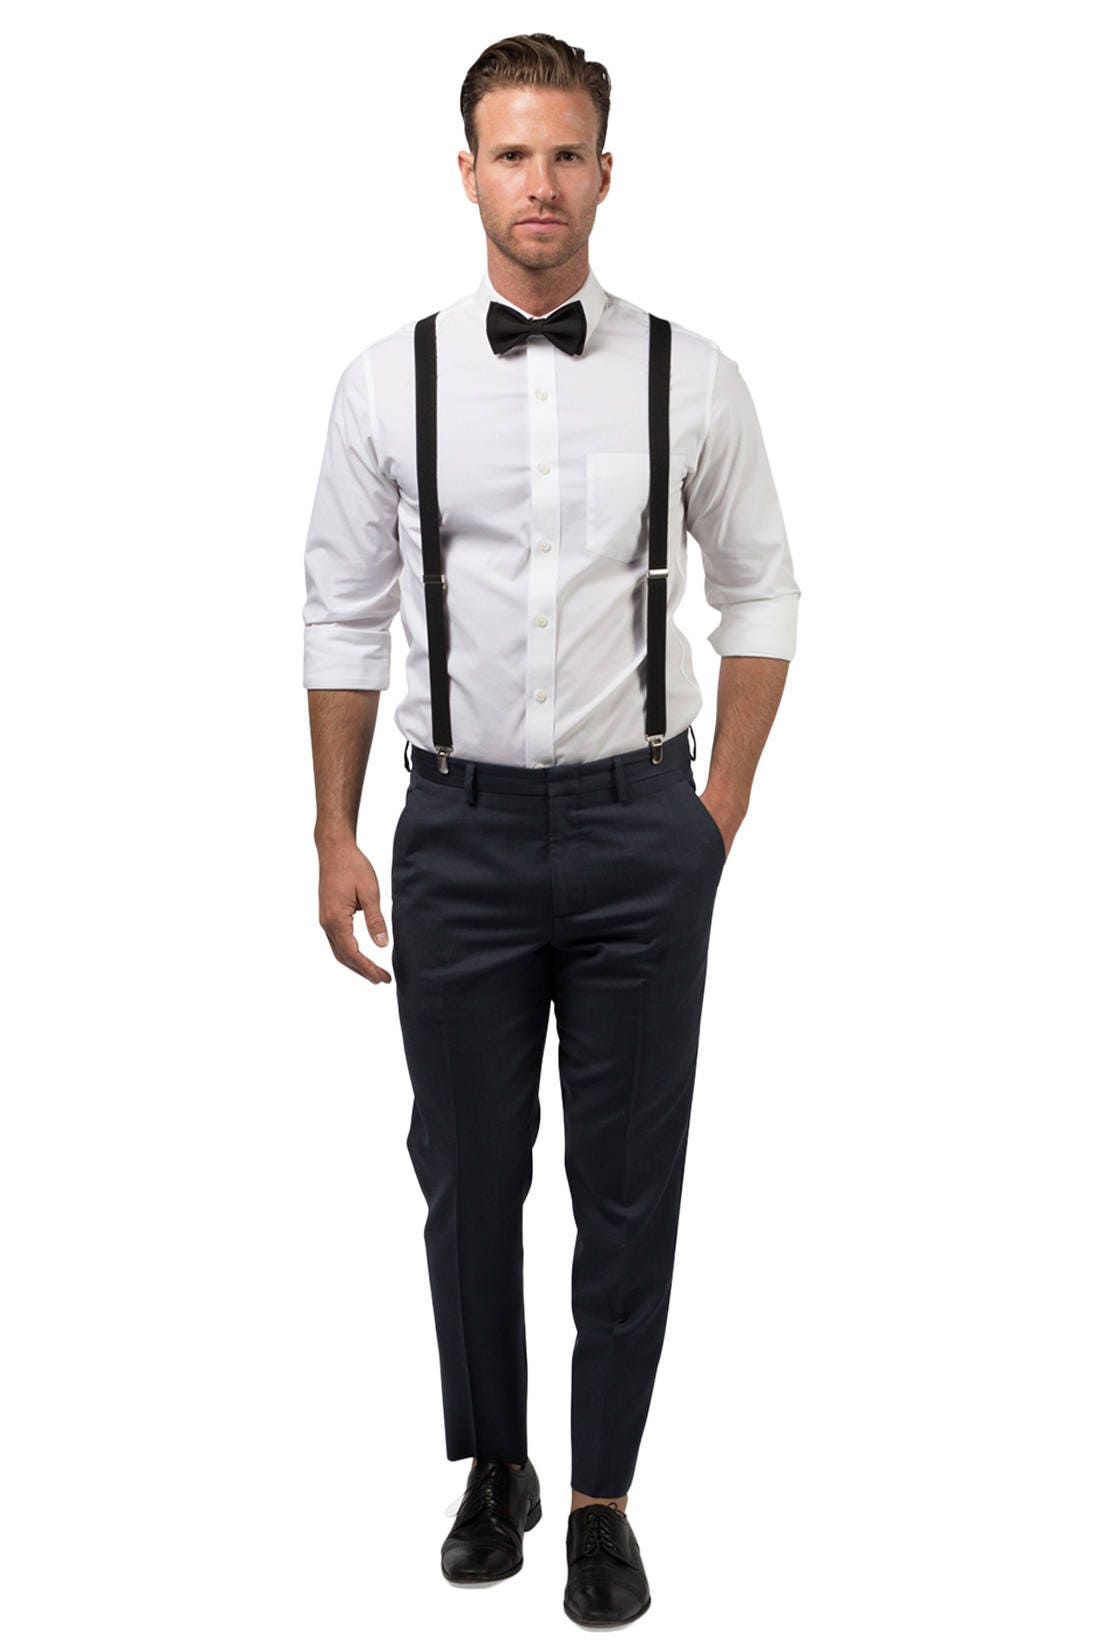 Suspender and Bow Tie Adults Men Solid White Wedding Formal Wear Accessories 